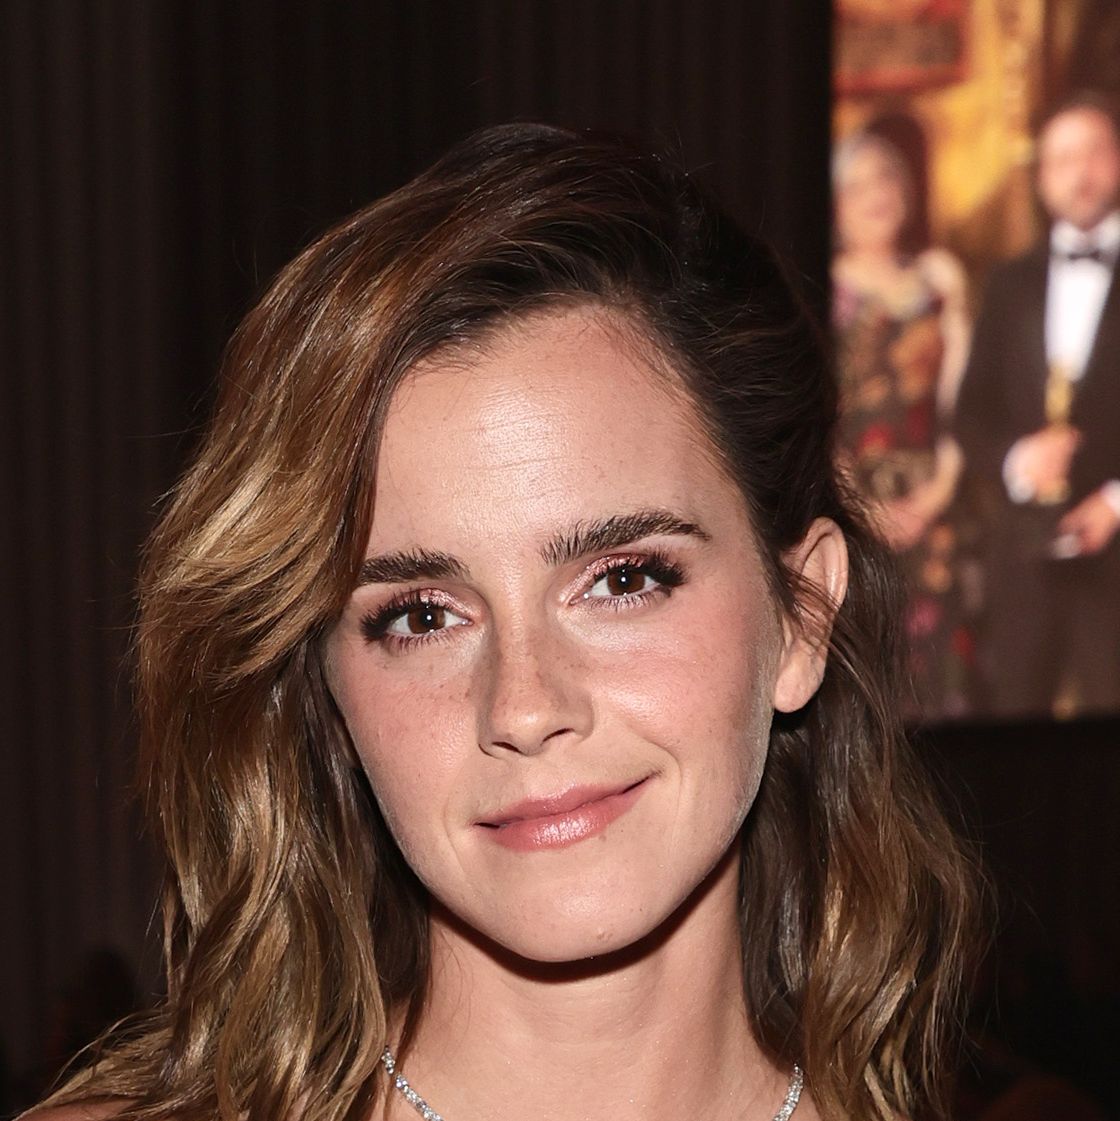 Emma Watson Is Toned All Over Rocking A Naked Dress In Oscars Pics